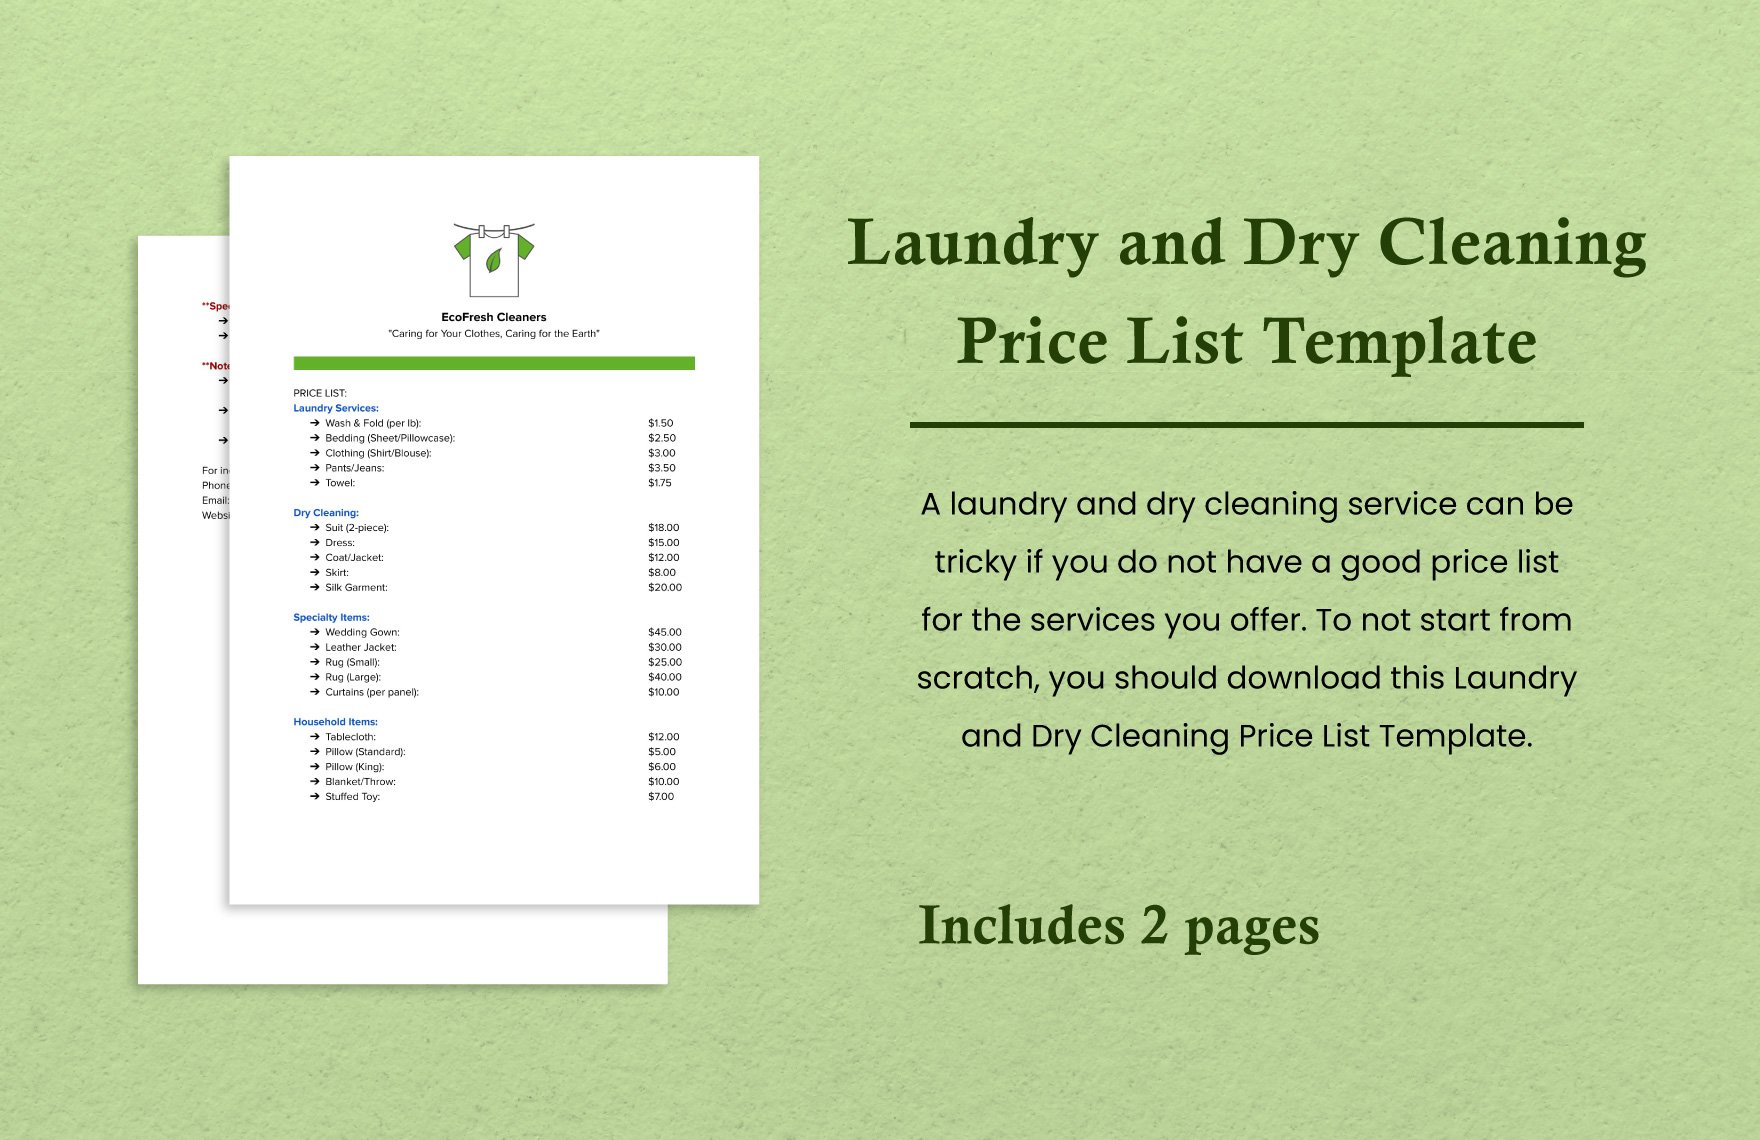 Laundry and Dry Cleaning Price List Template